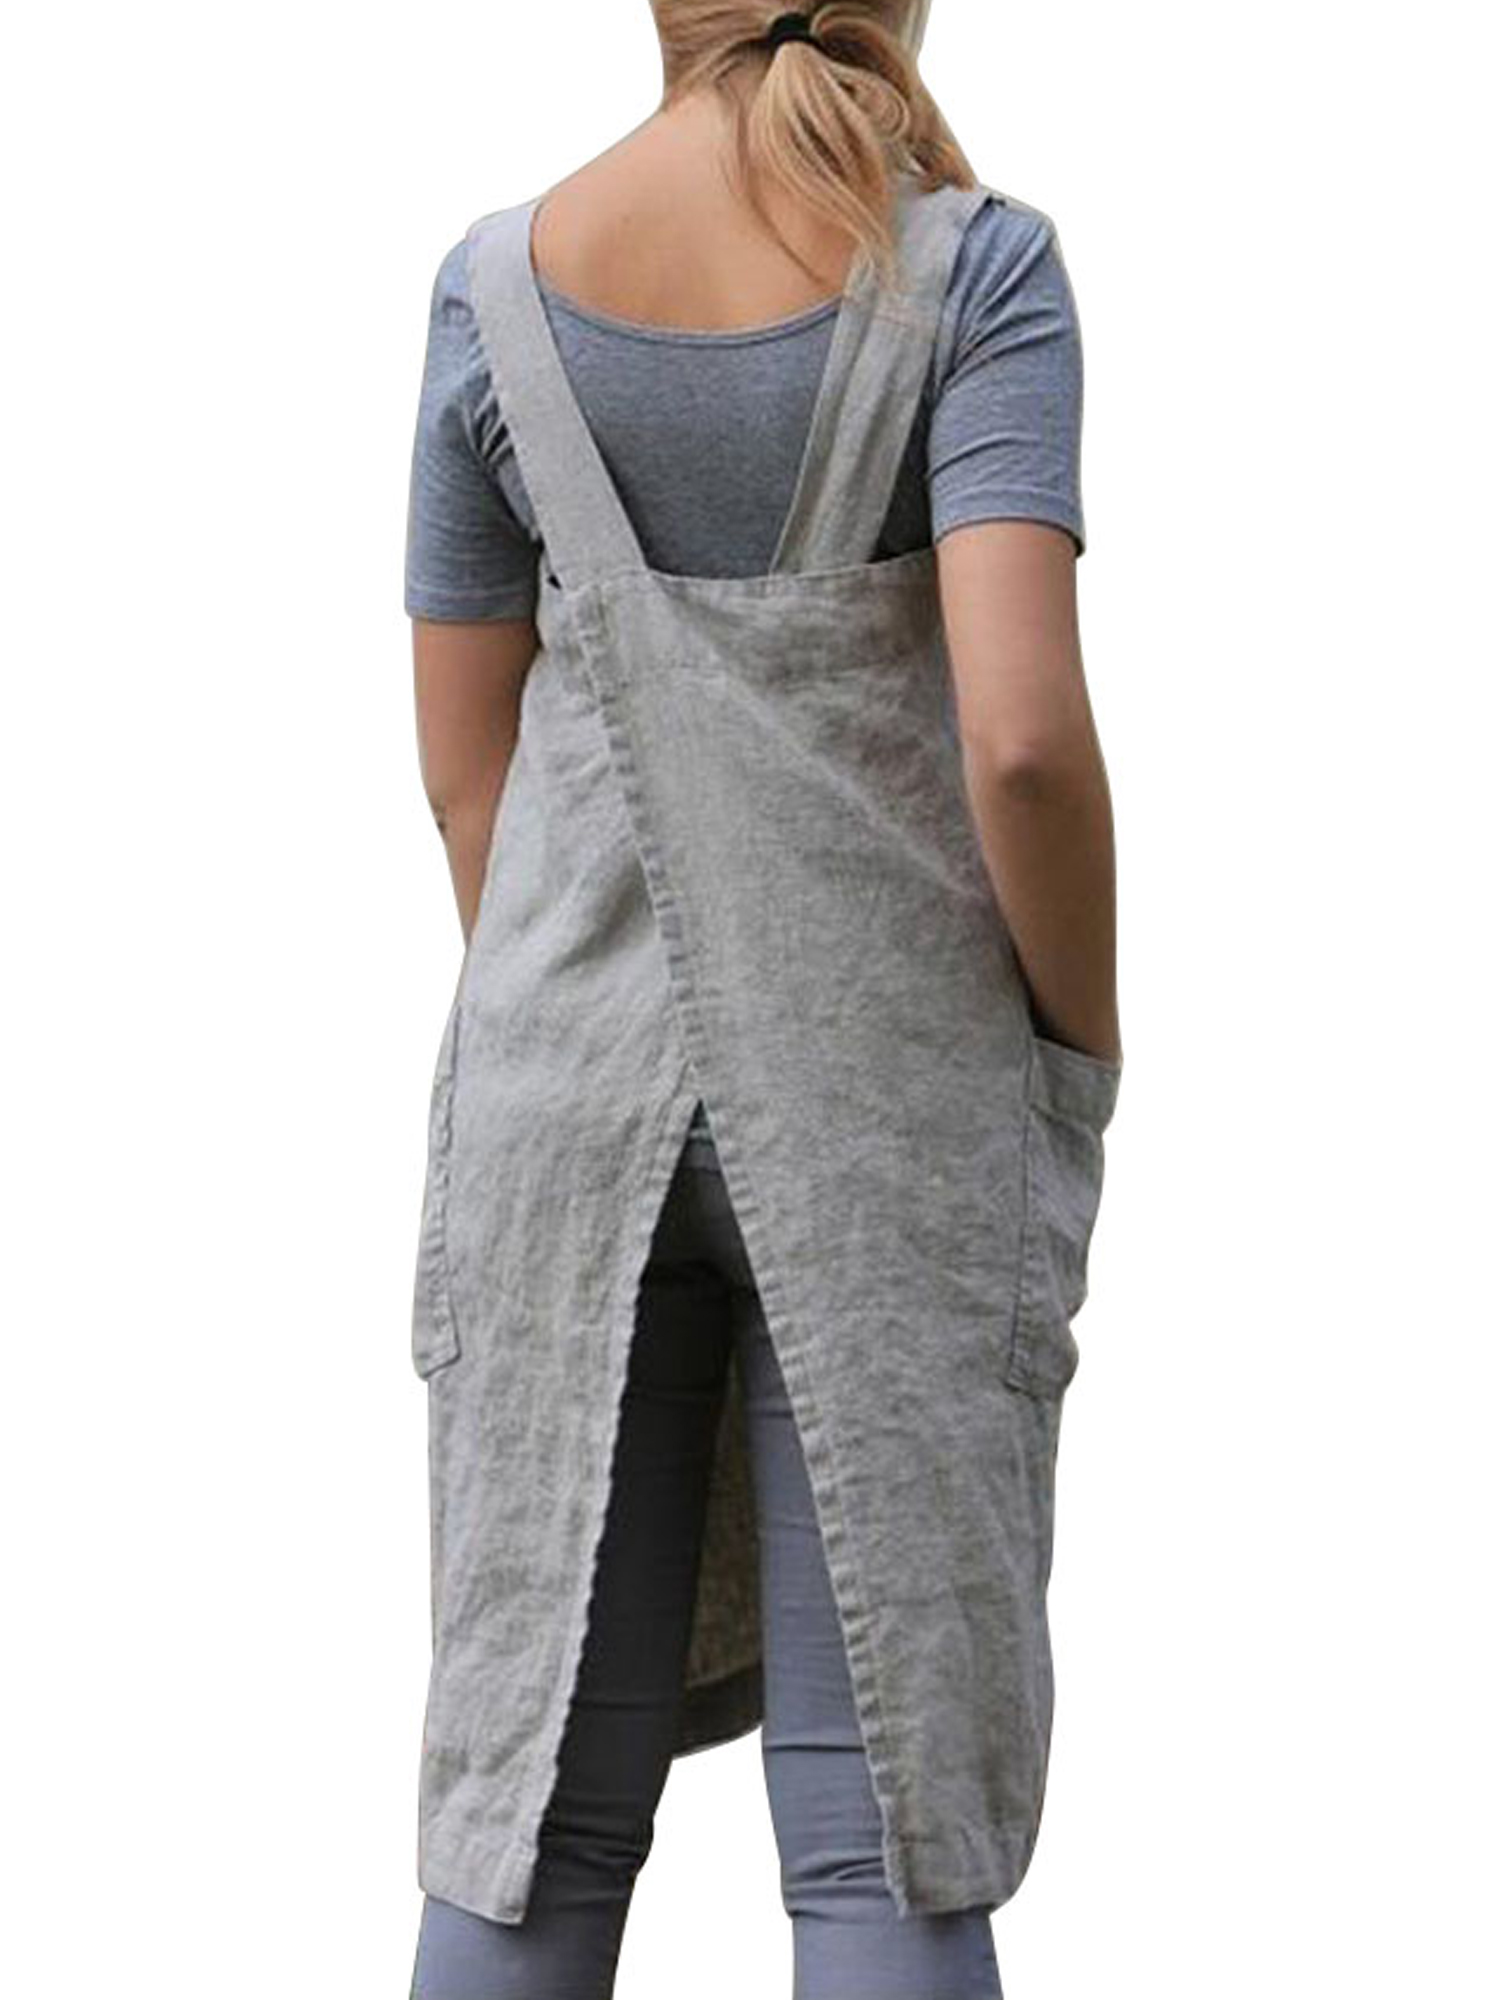 Listenwind Women’s Pinafore Square Apron Baking Cooking Gardening Works Cross Back Cotton/Linen Blend Dress with 2 Pockets Large Plus - image 4 of 5